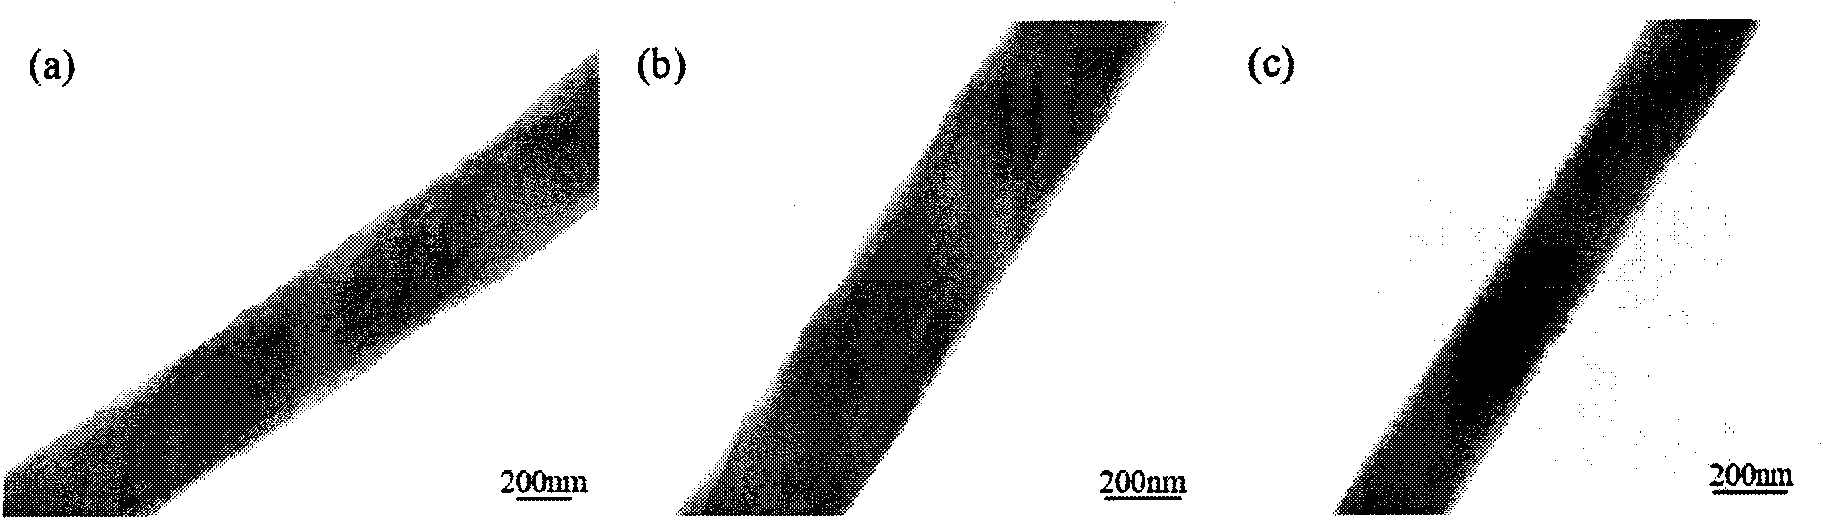 Core-shell structured polyvinylidene fluoride/polycarbonate superfine fiber and preparing method thereof